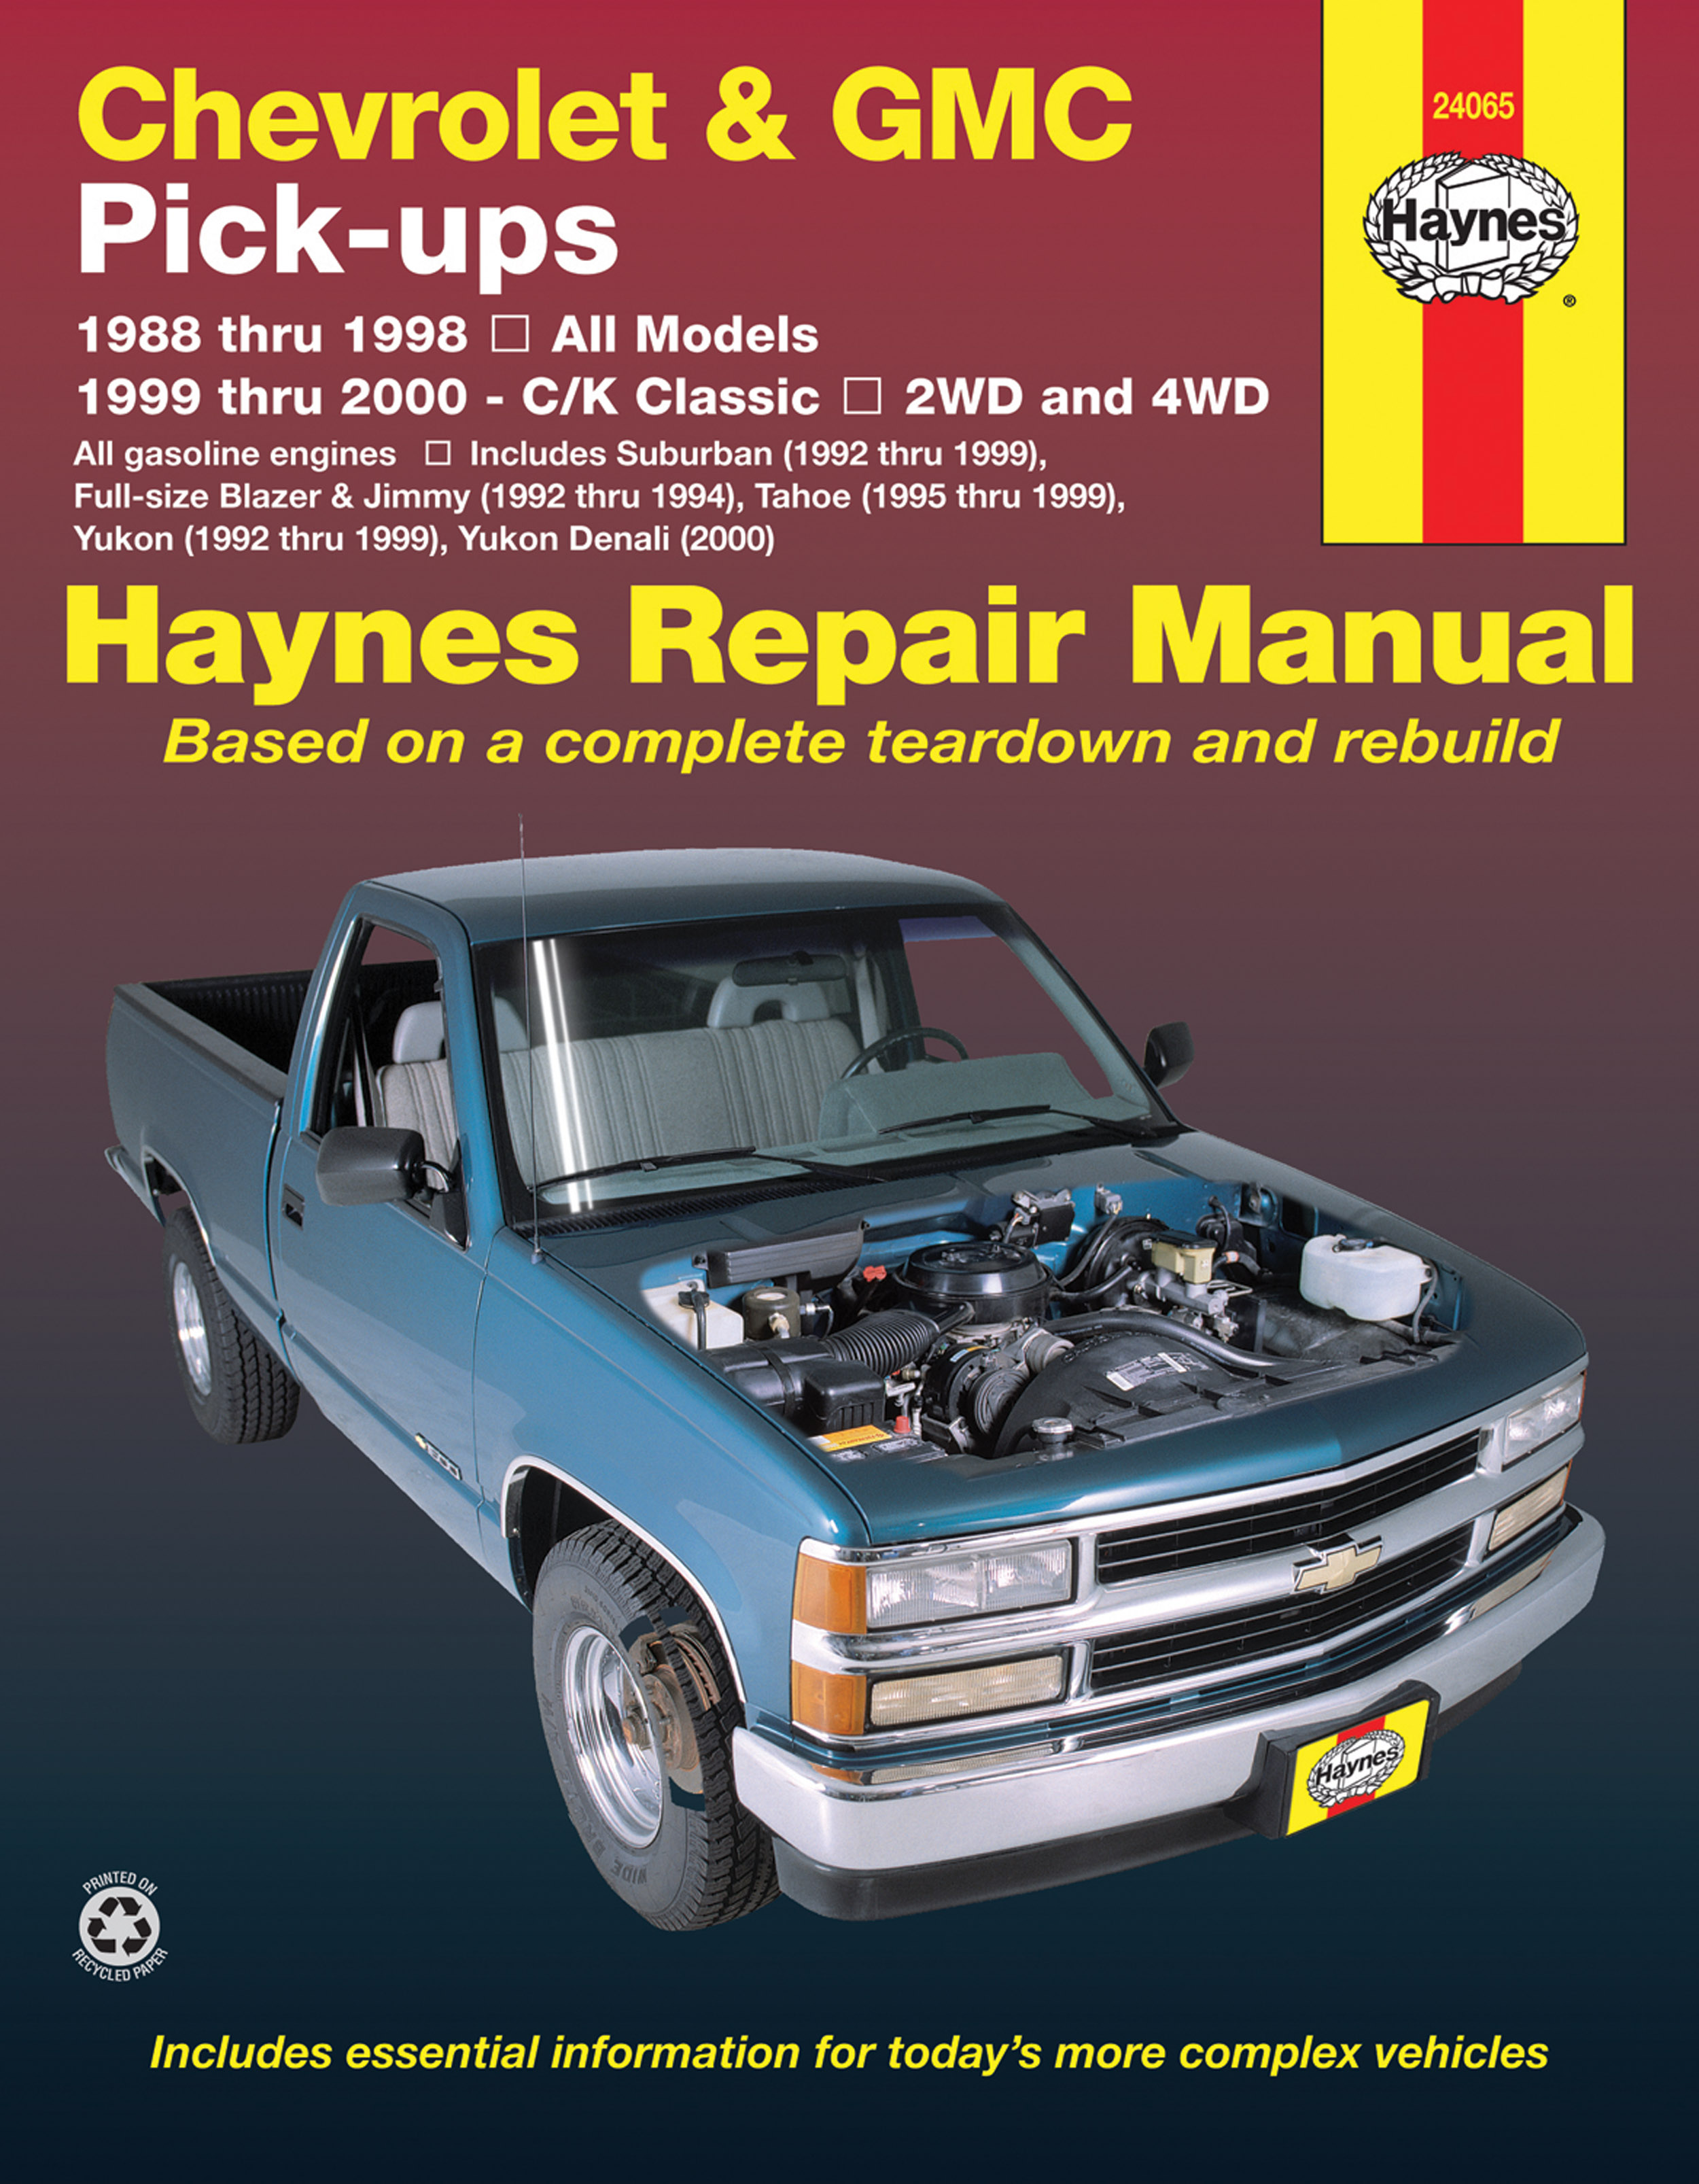 95 1995 GMC Jimmy owners manual